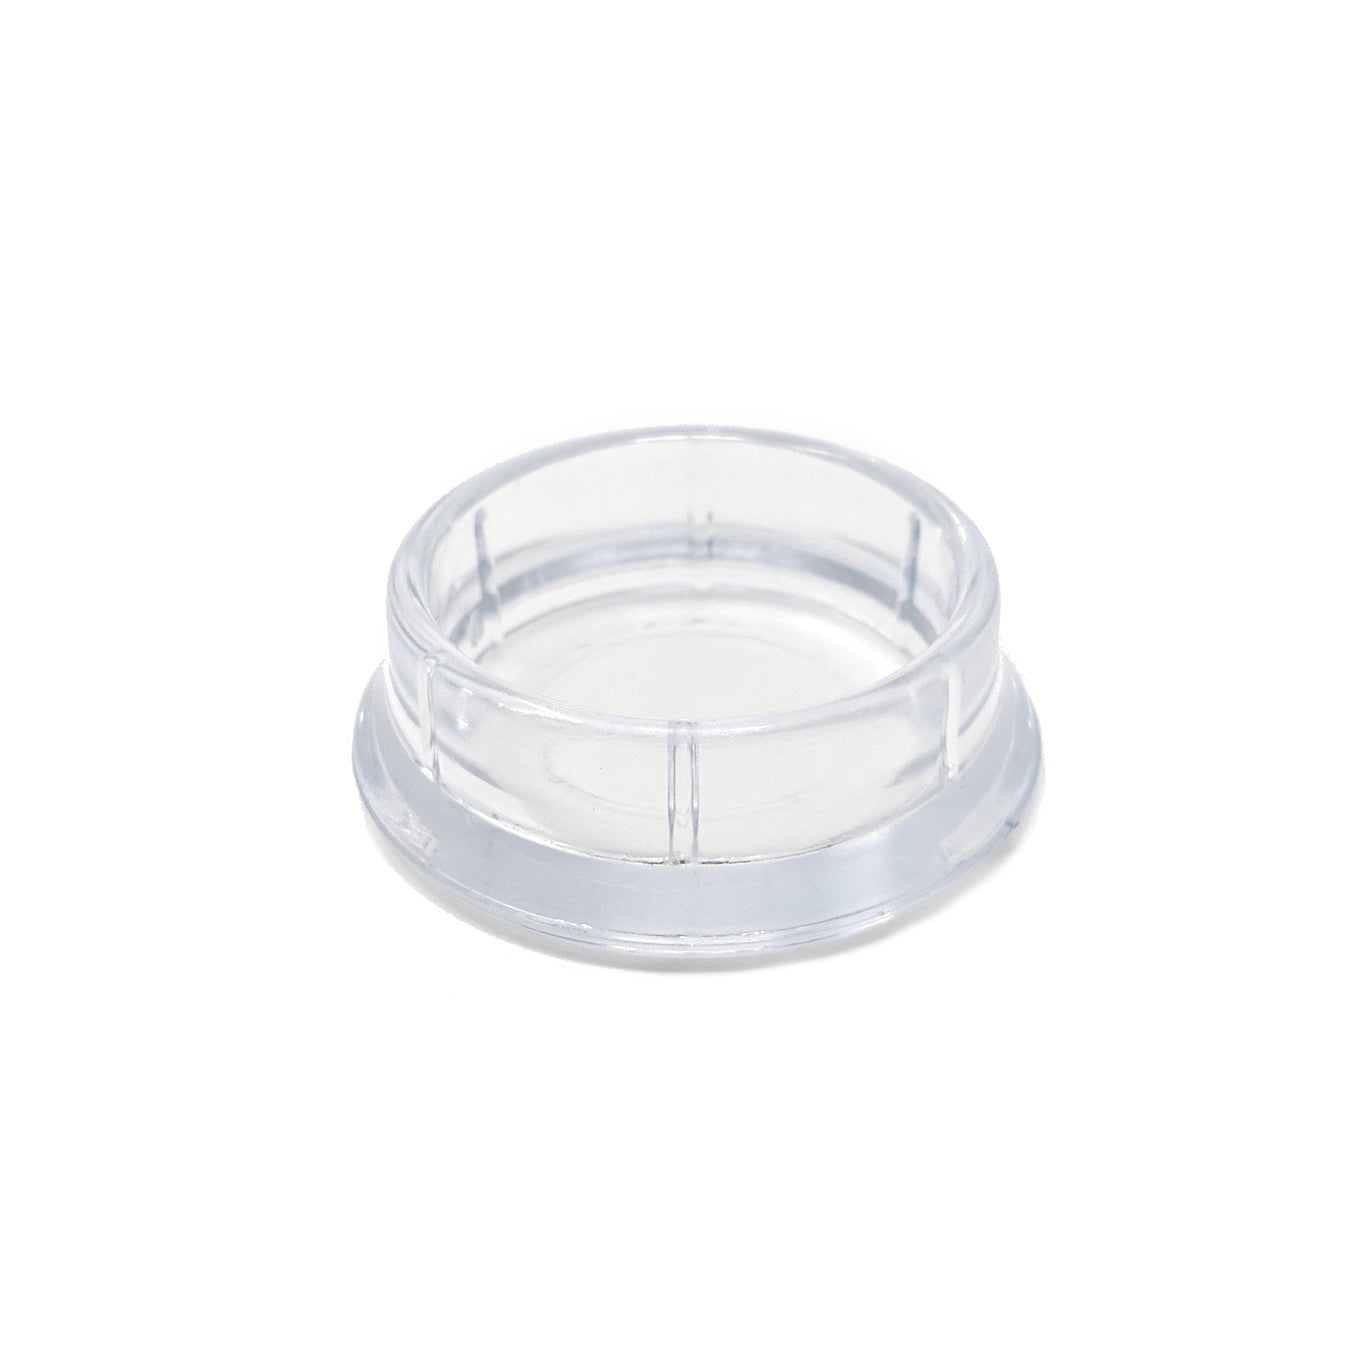 33mm Clear Round Furniture Leg Cups Floor Carpet Protector - Made in Germany - Keay Vital Parts